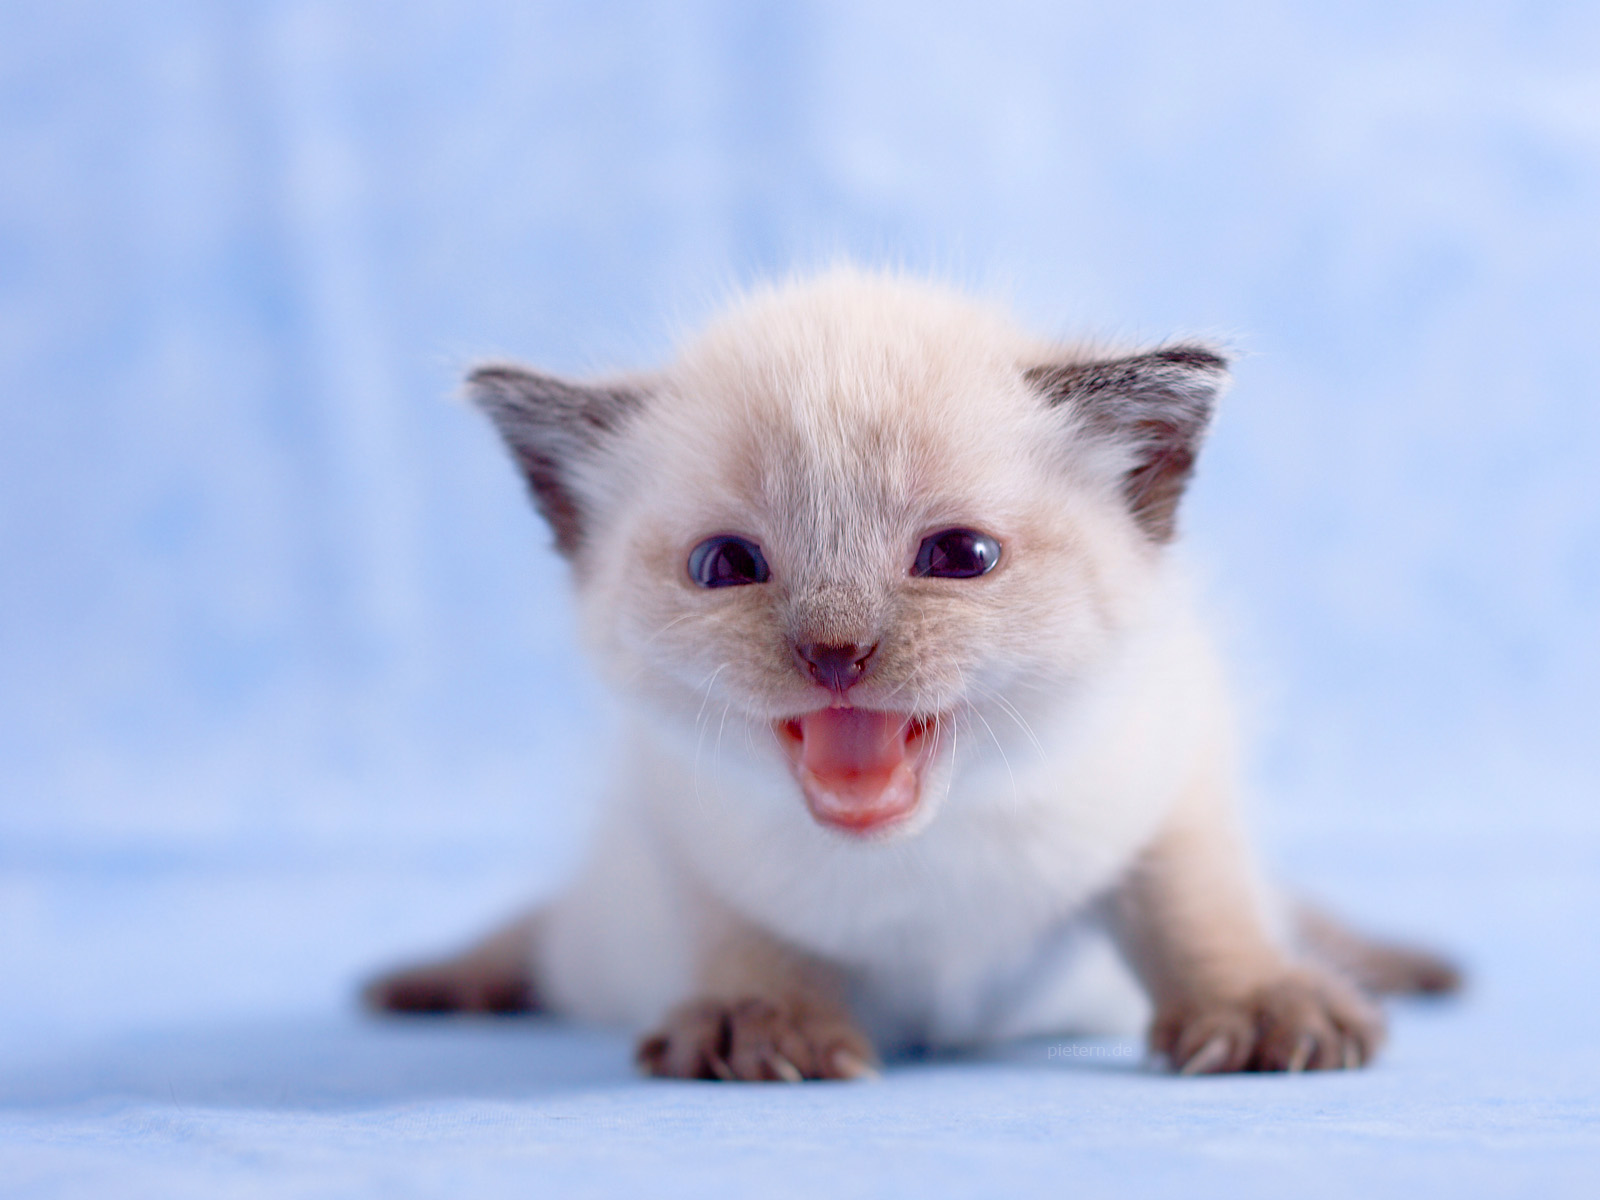 Cute Kittens - Pictures - The Wondrous Pics